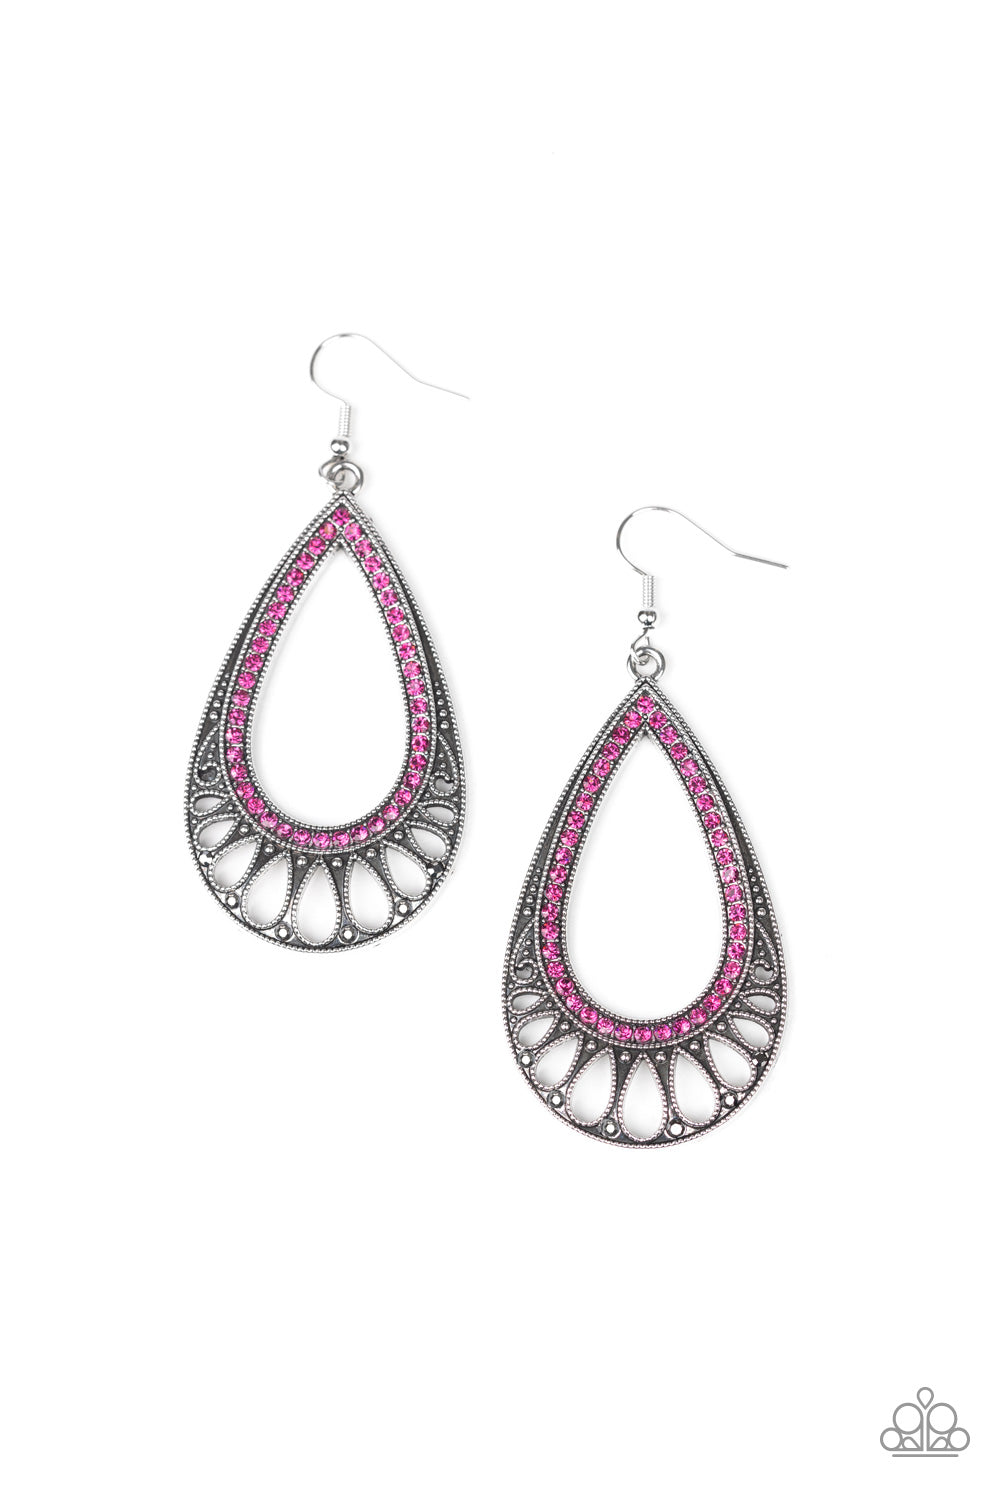 Royal Finesse Pink Paparazzi Earring Cashmere Pink Jewels - Cashmere Pink Jewels & Accessories, Cashmere Pink Jewels & Accessories - Paparazzi